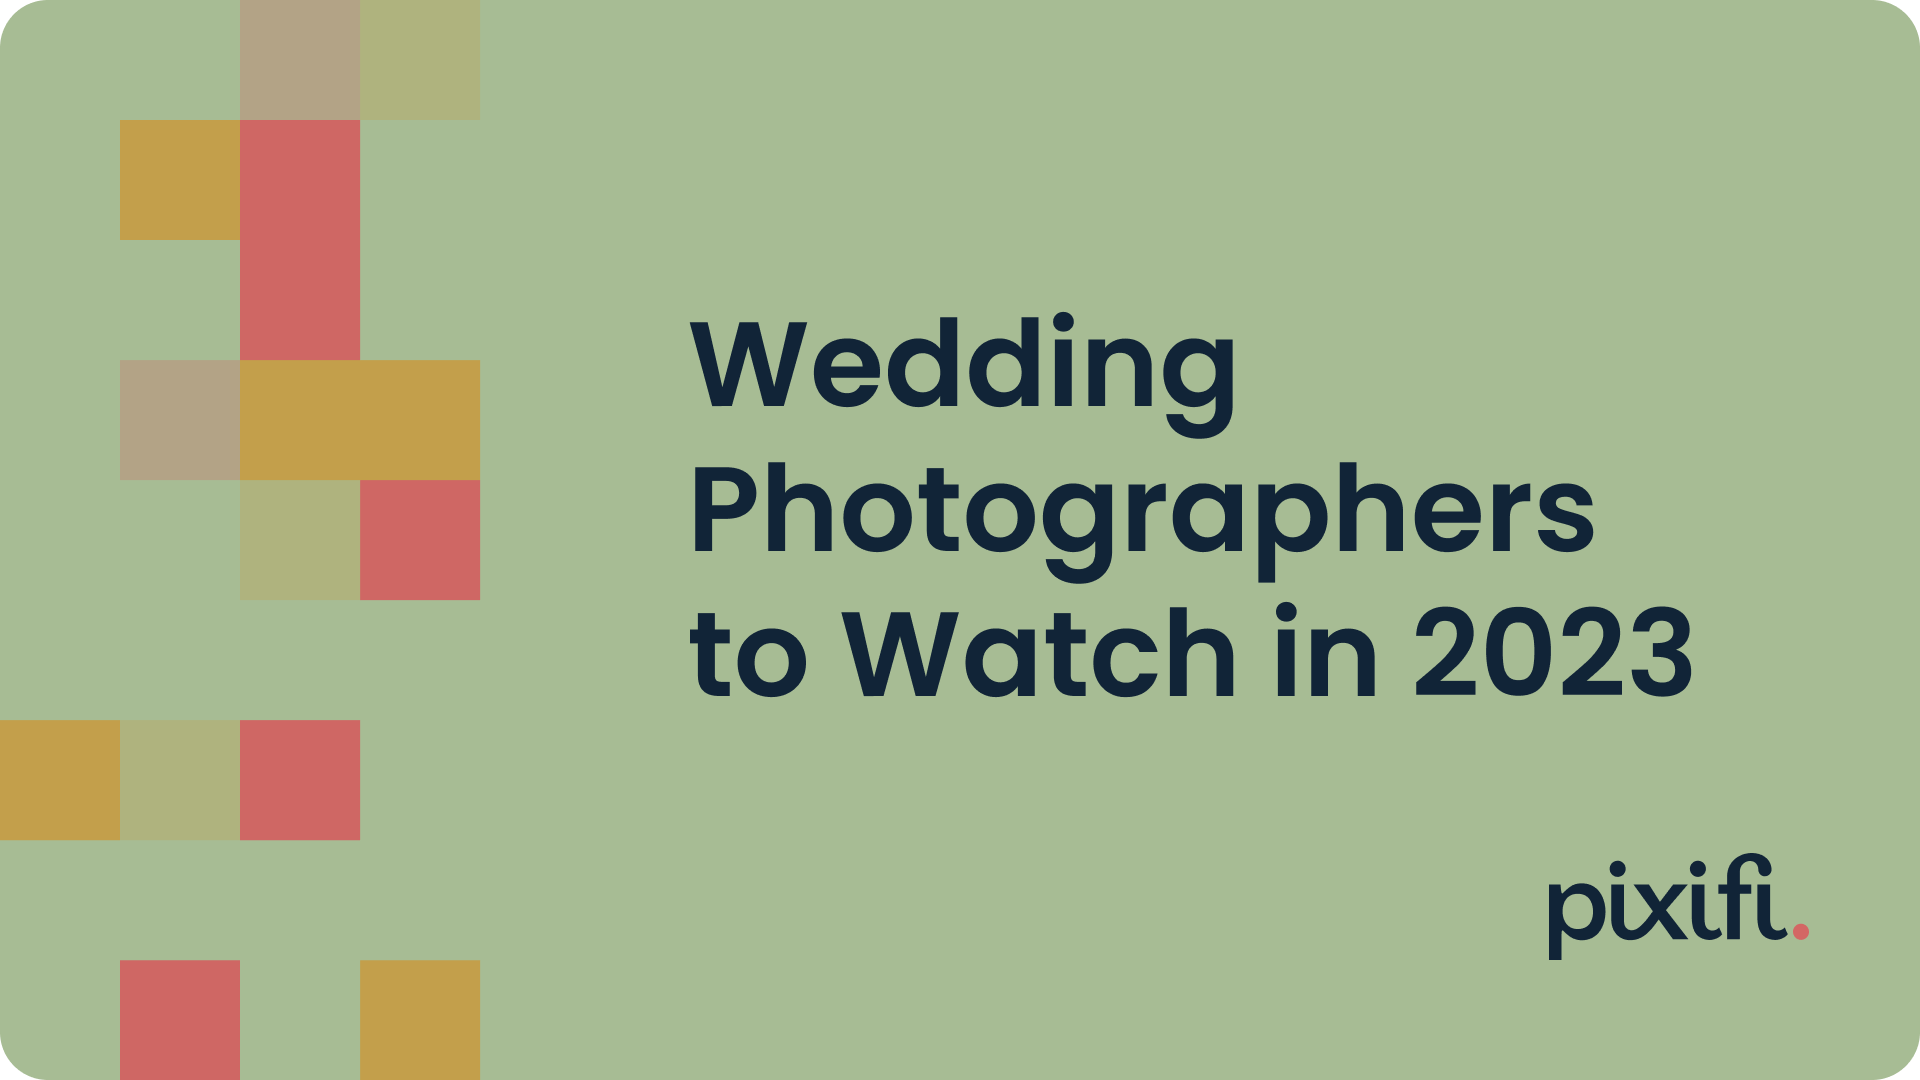 Top 10 Up-and-Coming Wedding Photographers to Watch in 2023